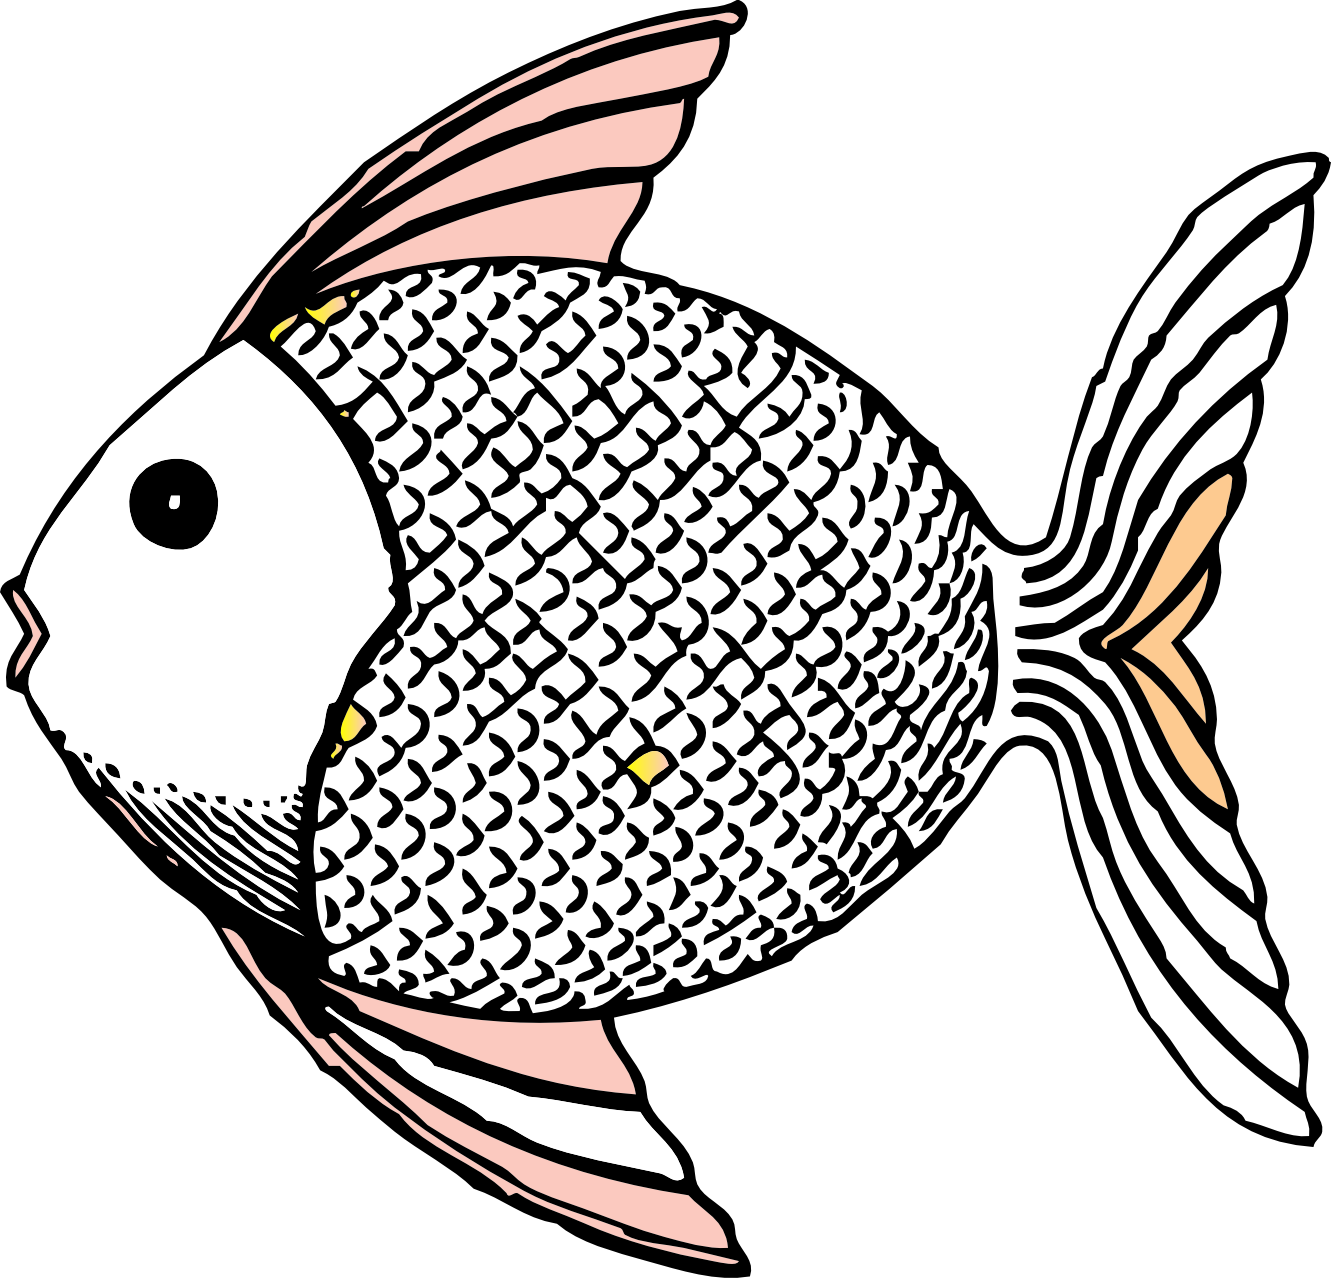 Fish black and white fish clip art black and white free clipart images